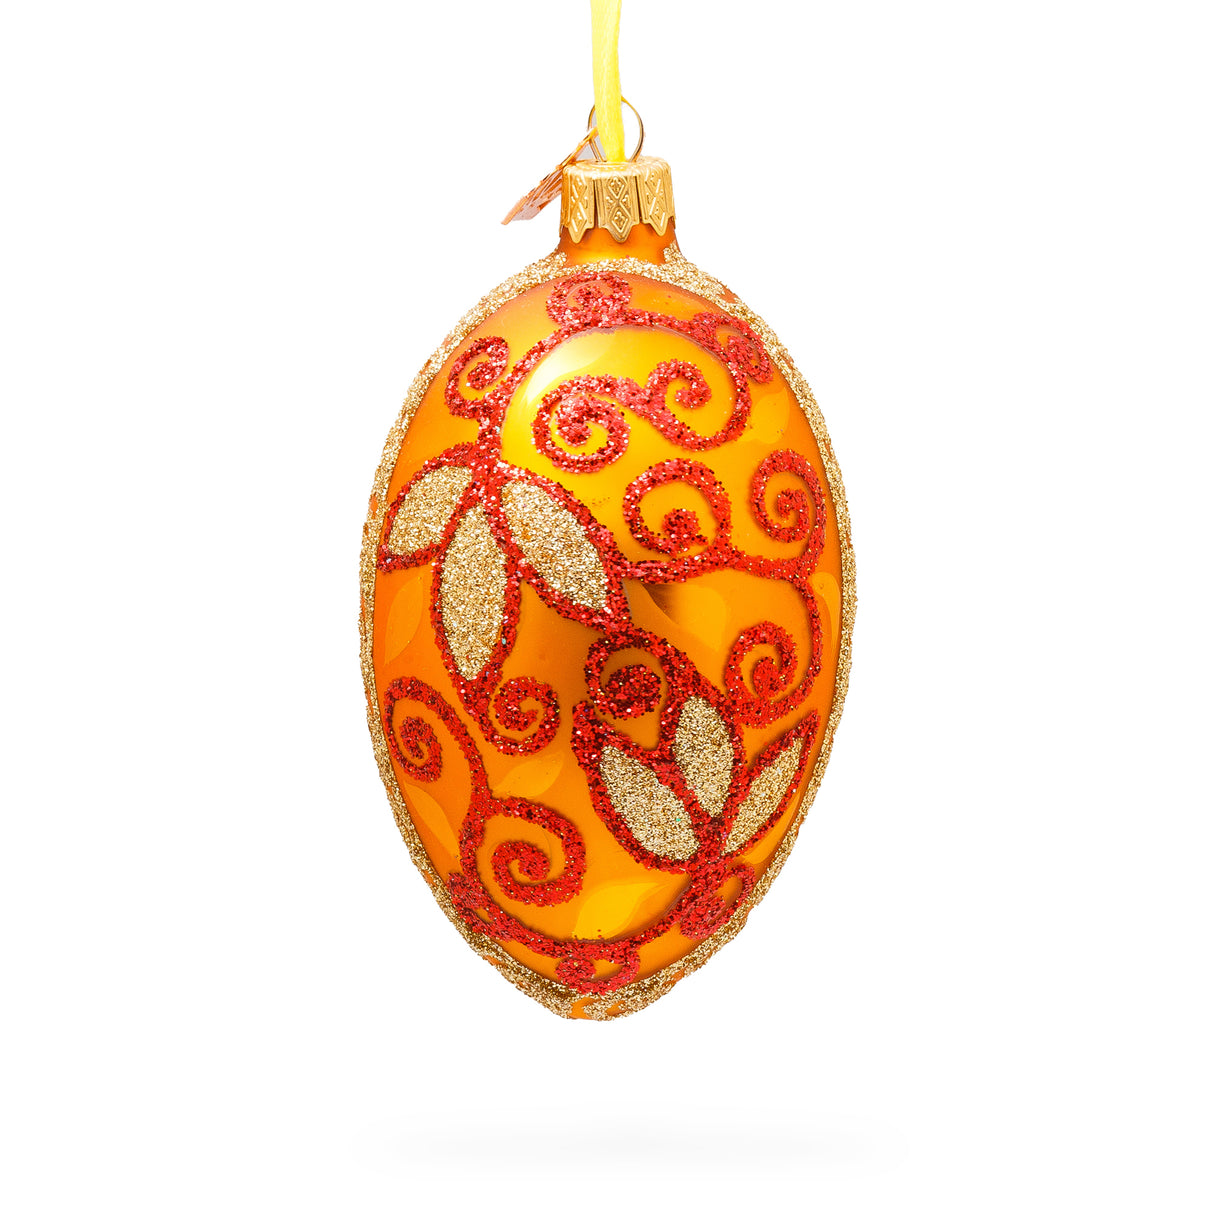 Autumn Leaves on Gold Glass Egg Christmas Ornament 4 Inches in Orange color, Oval shape